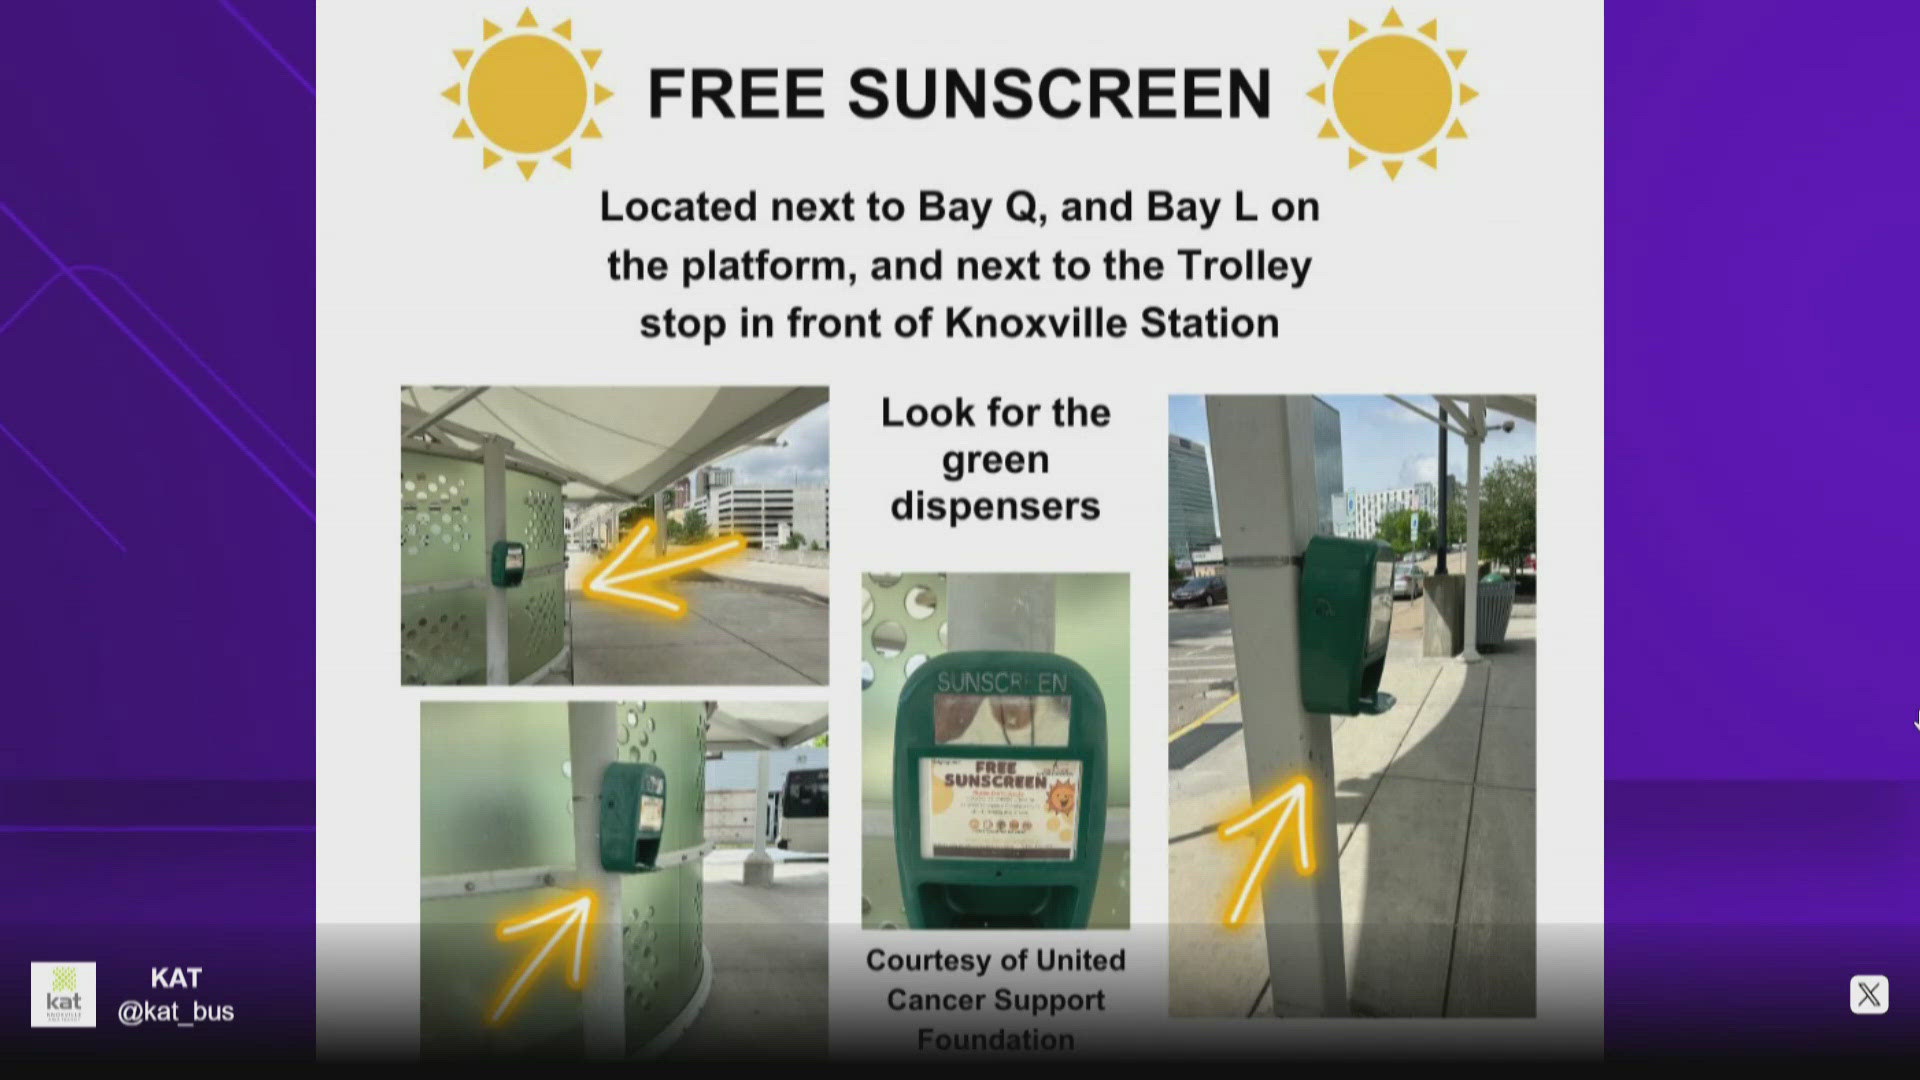 Knoxville Area Transit said the sunscreen was provided by the United Cancer Support Foundation.